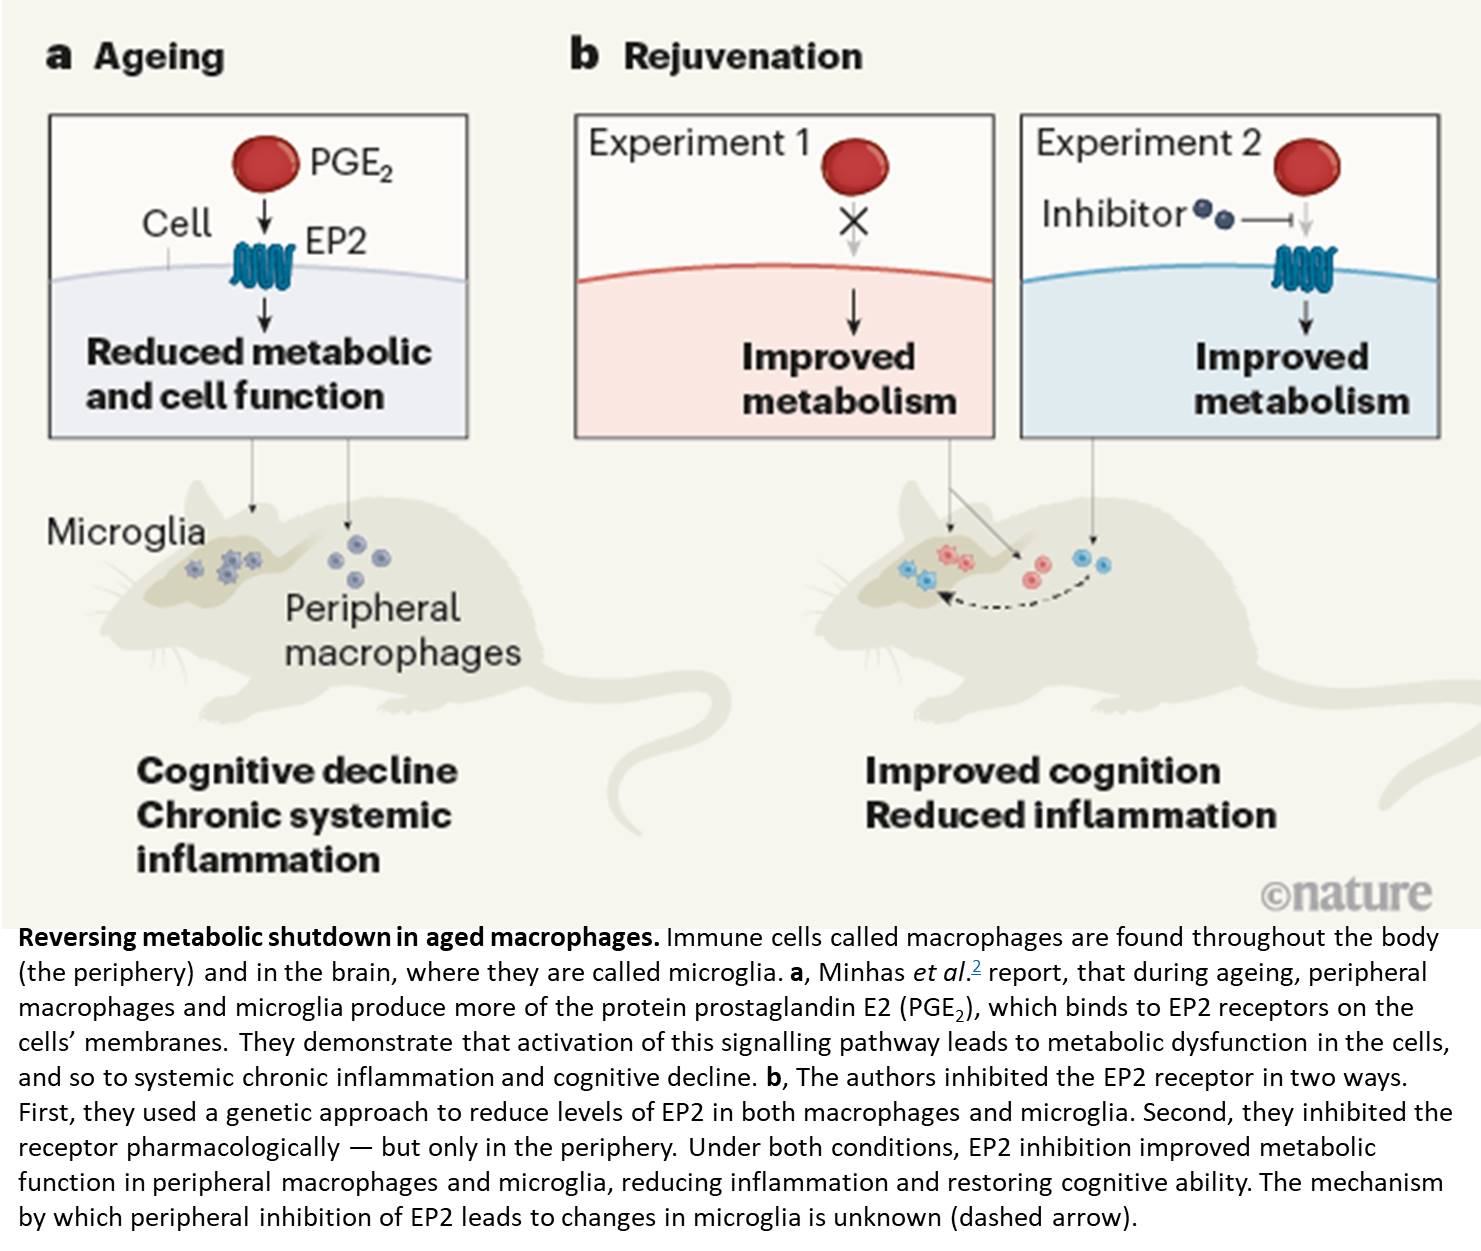 Reversing cognitive decline in ageing by restoring immune cell metabolism